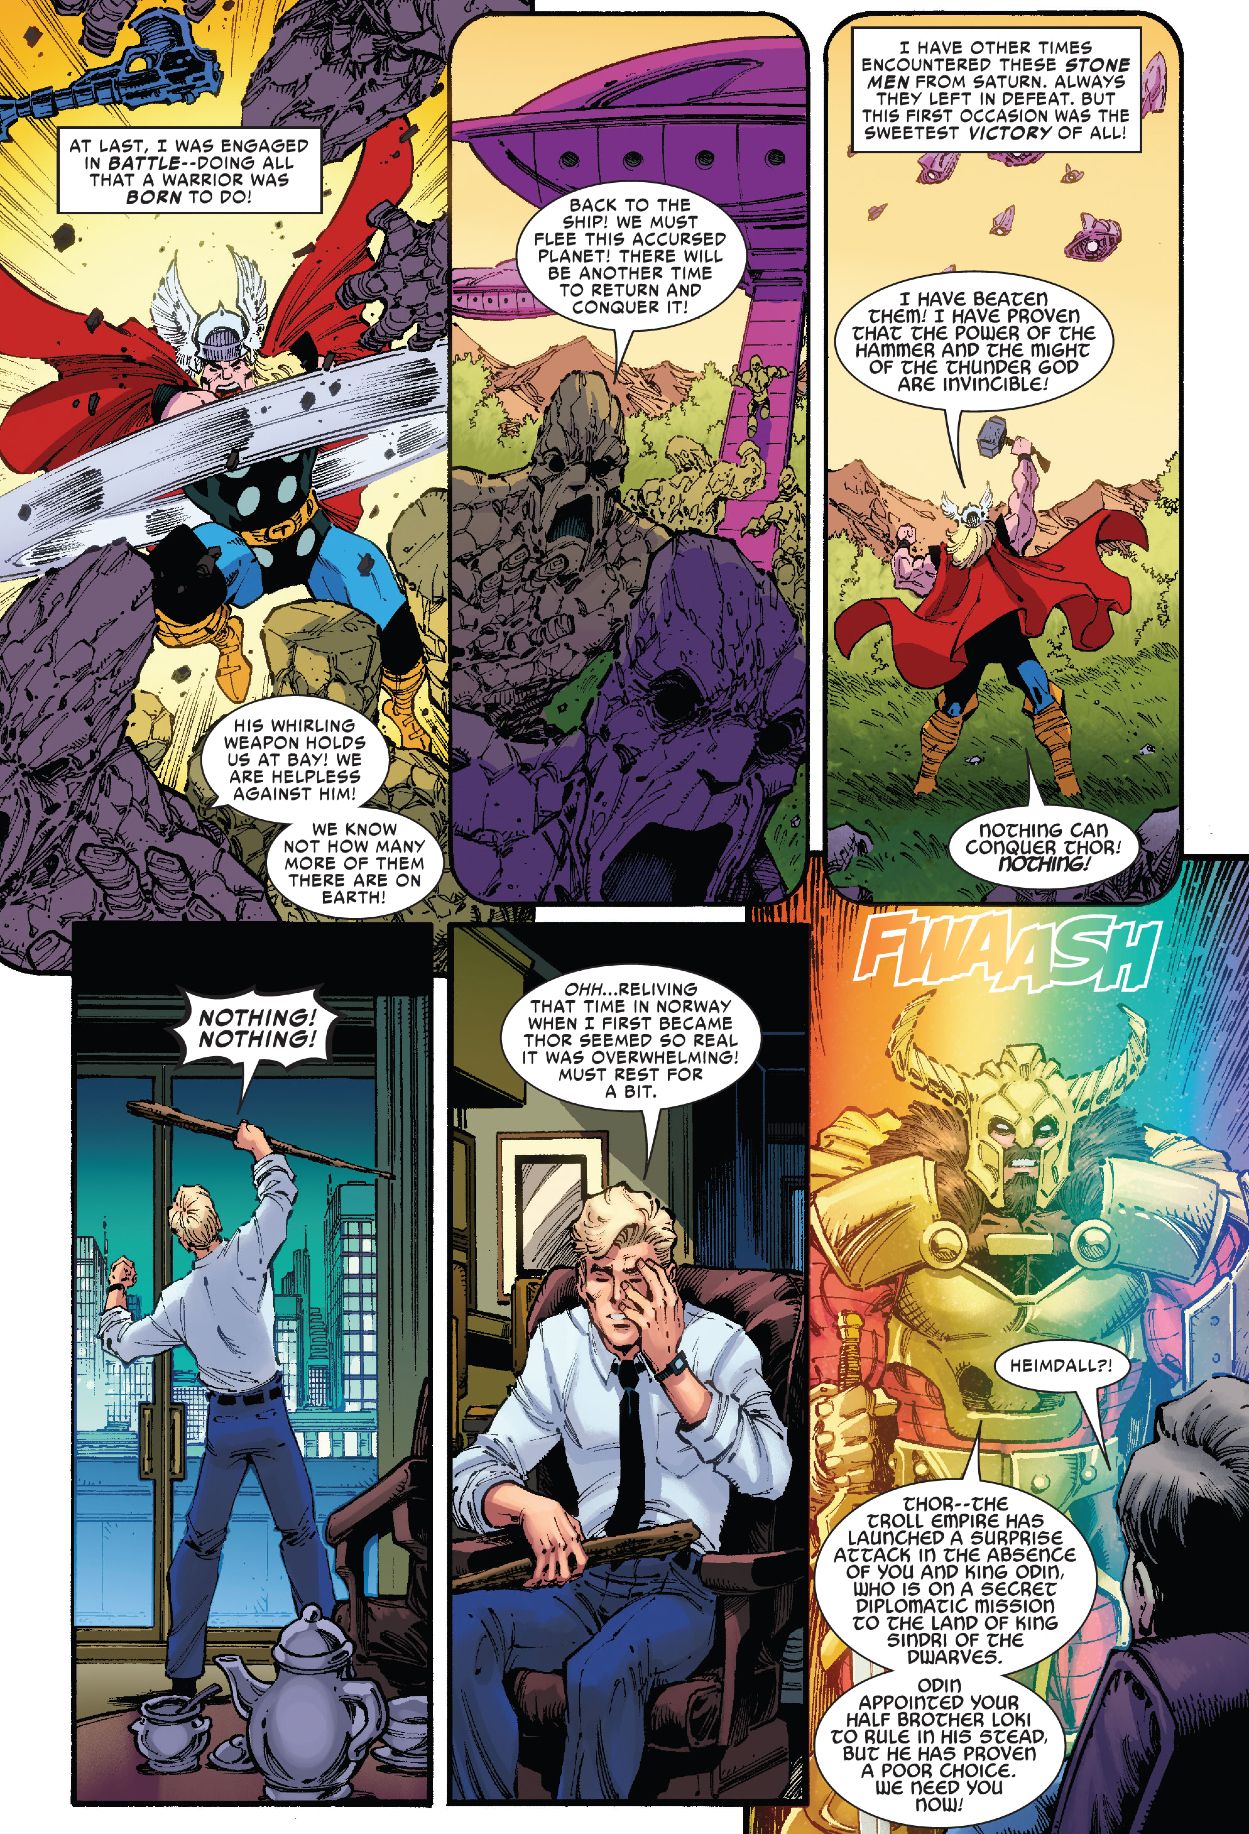 Donald becomes Thor in Thor Lightning and Lament #1 